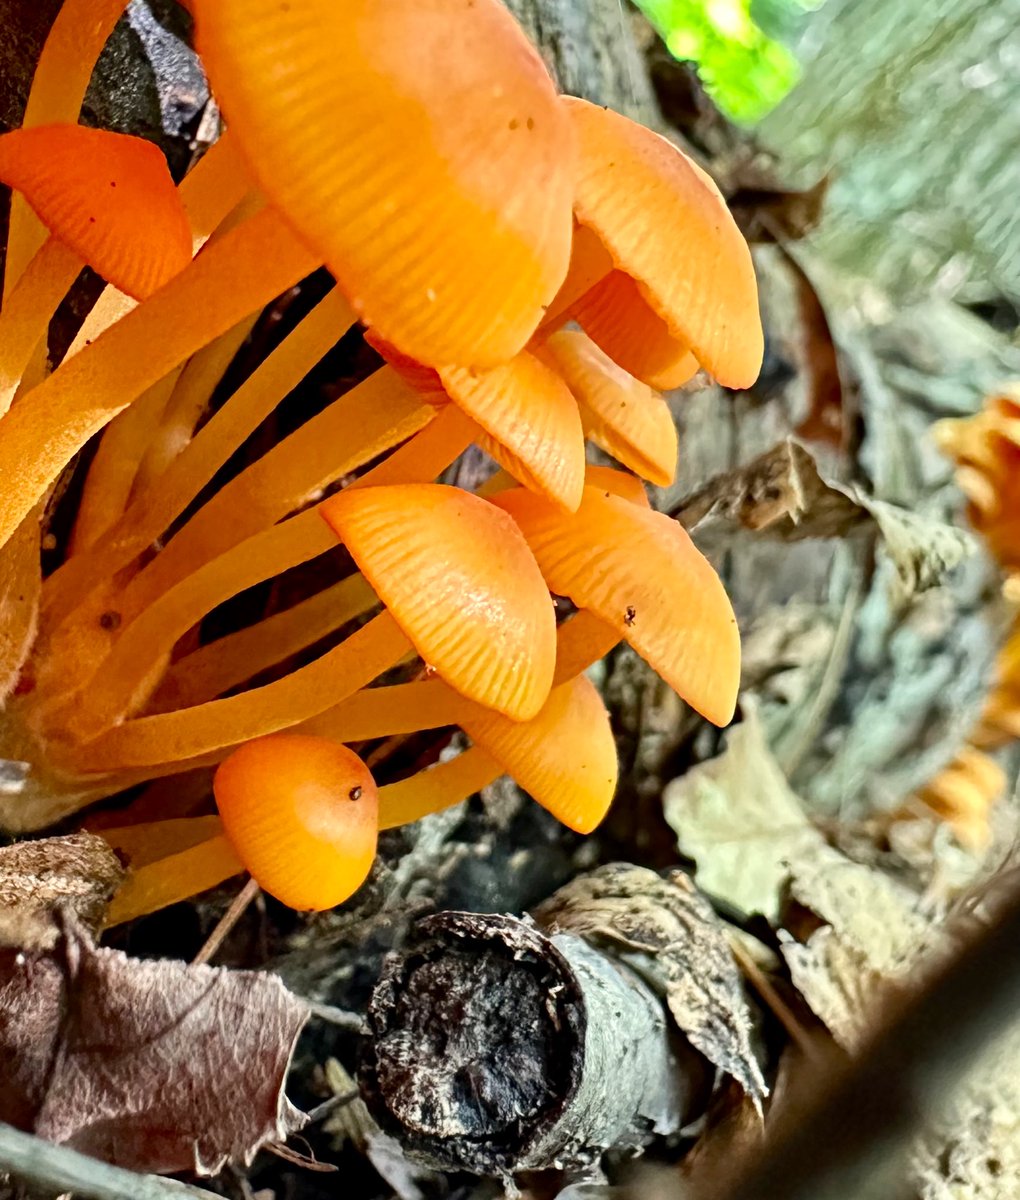 Orange you glad to know?
These fungi brought to you for
#ThickTrunkTuesday

#MushroomOfTheDay